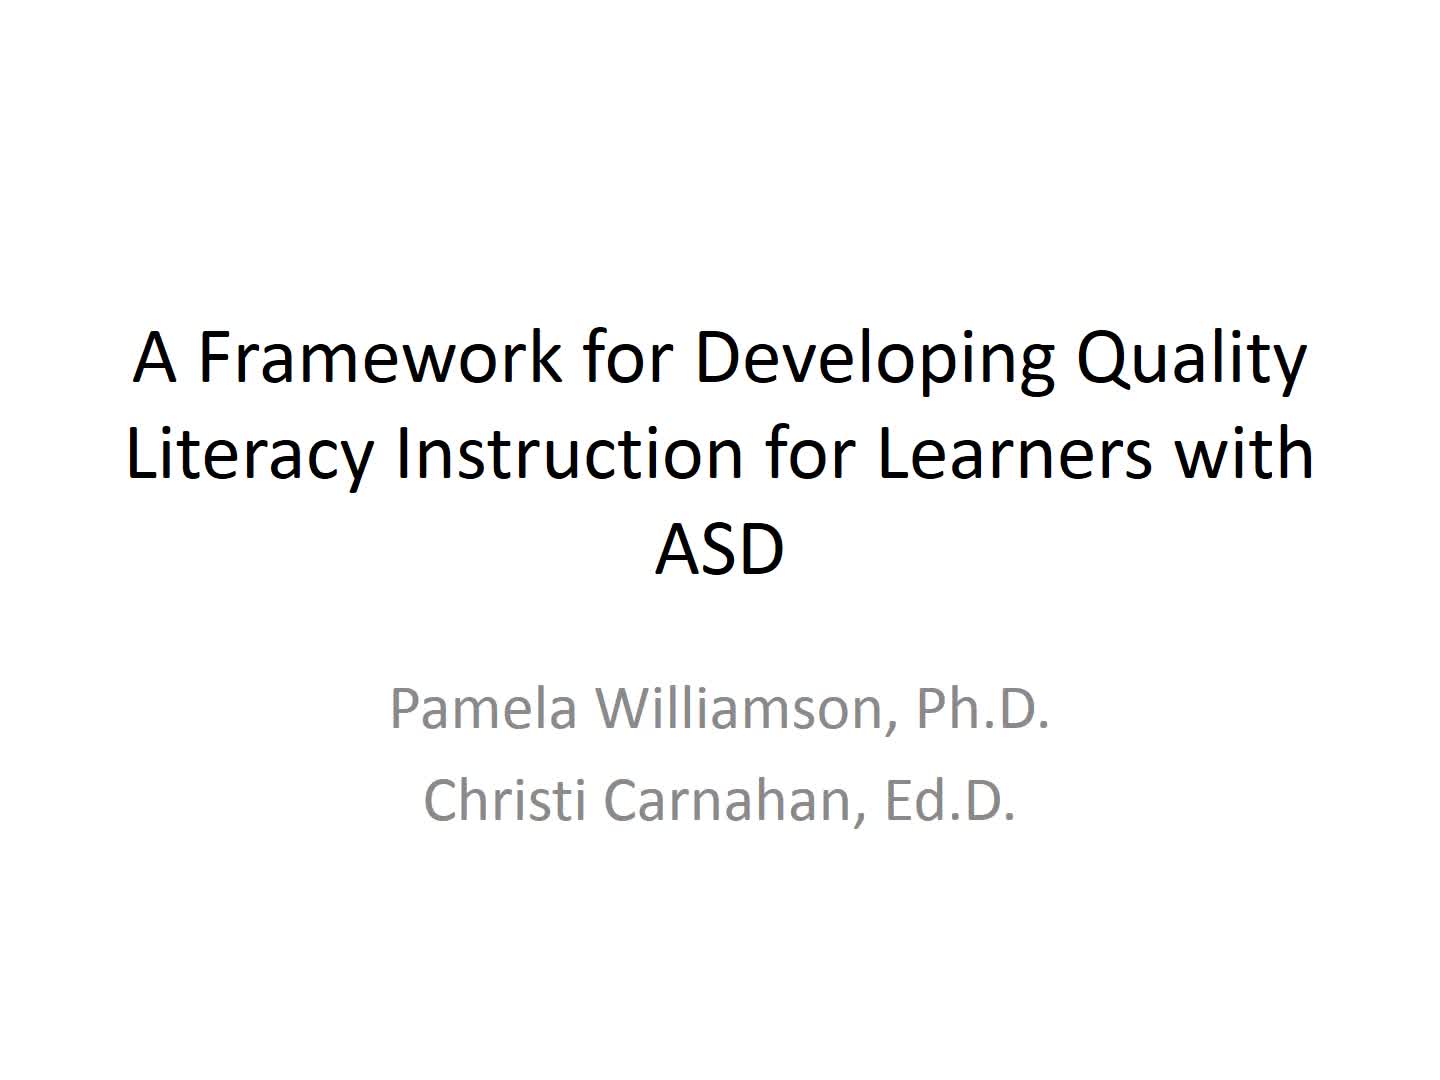 A Framework for Developing Quality Literacy Instruction for Learners with ASD Part 2